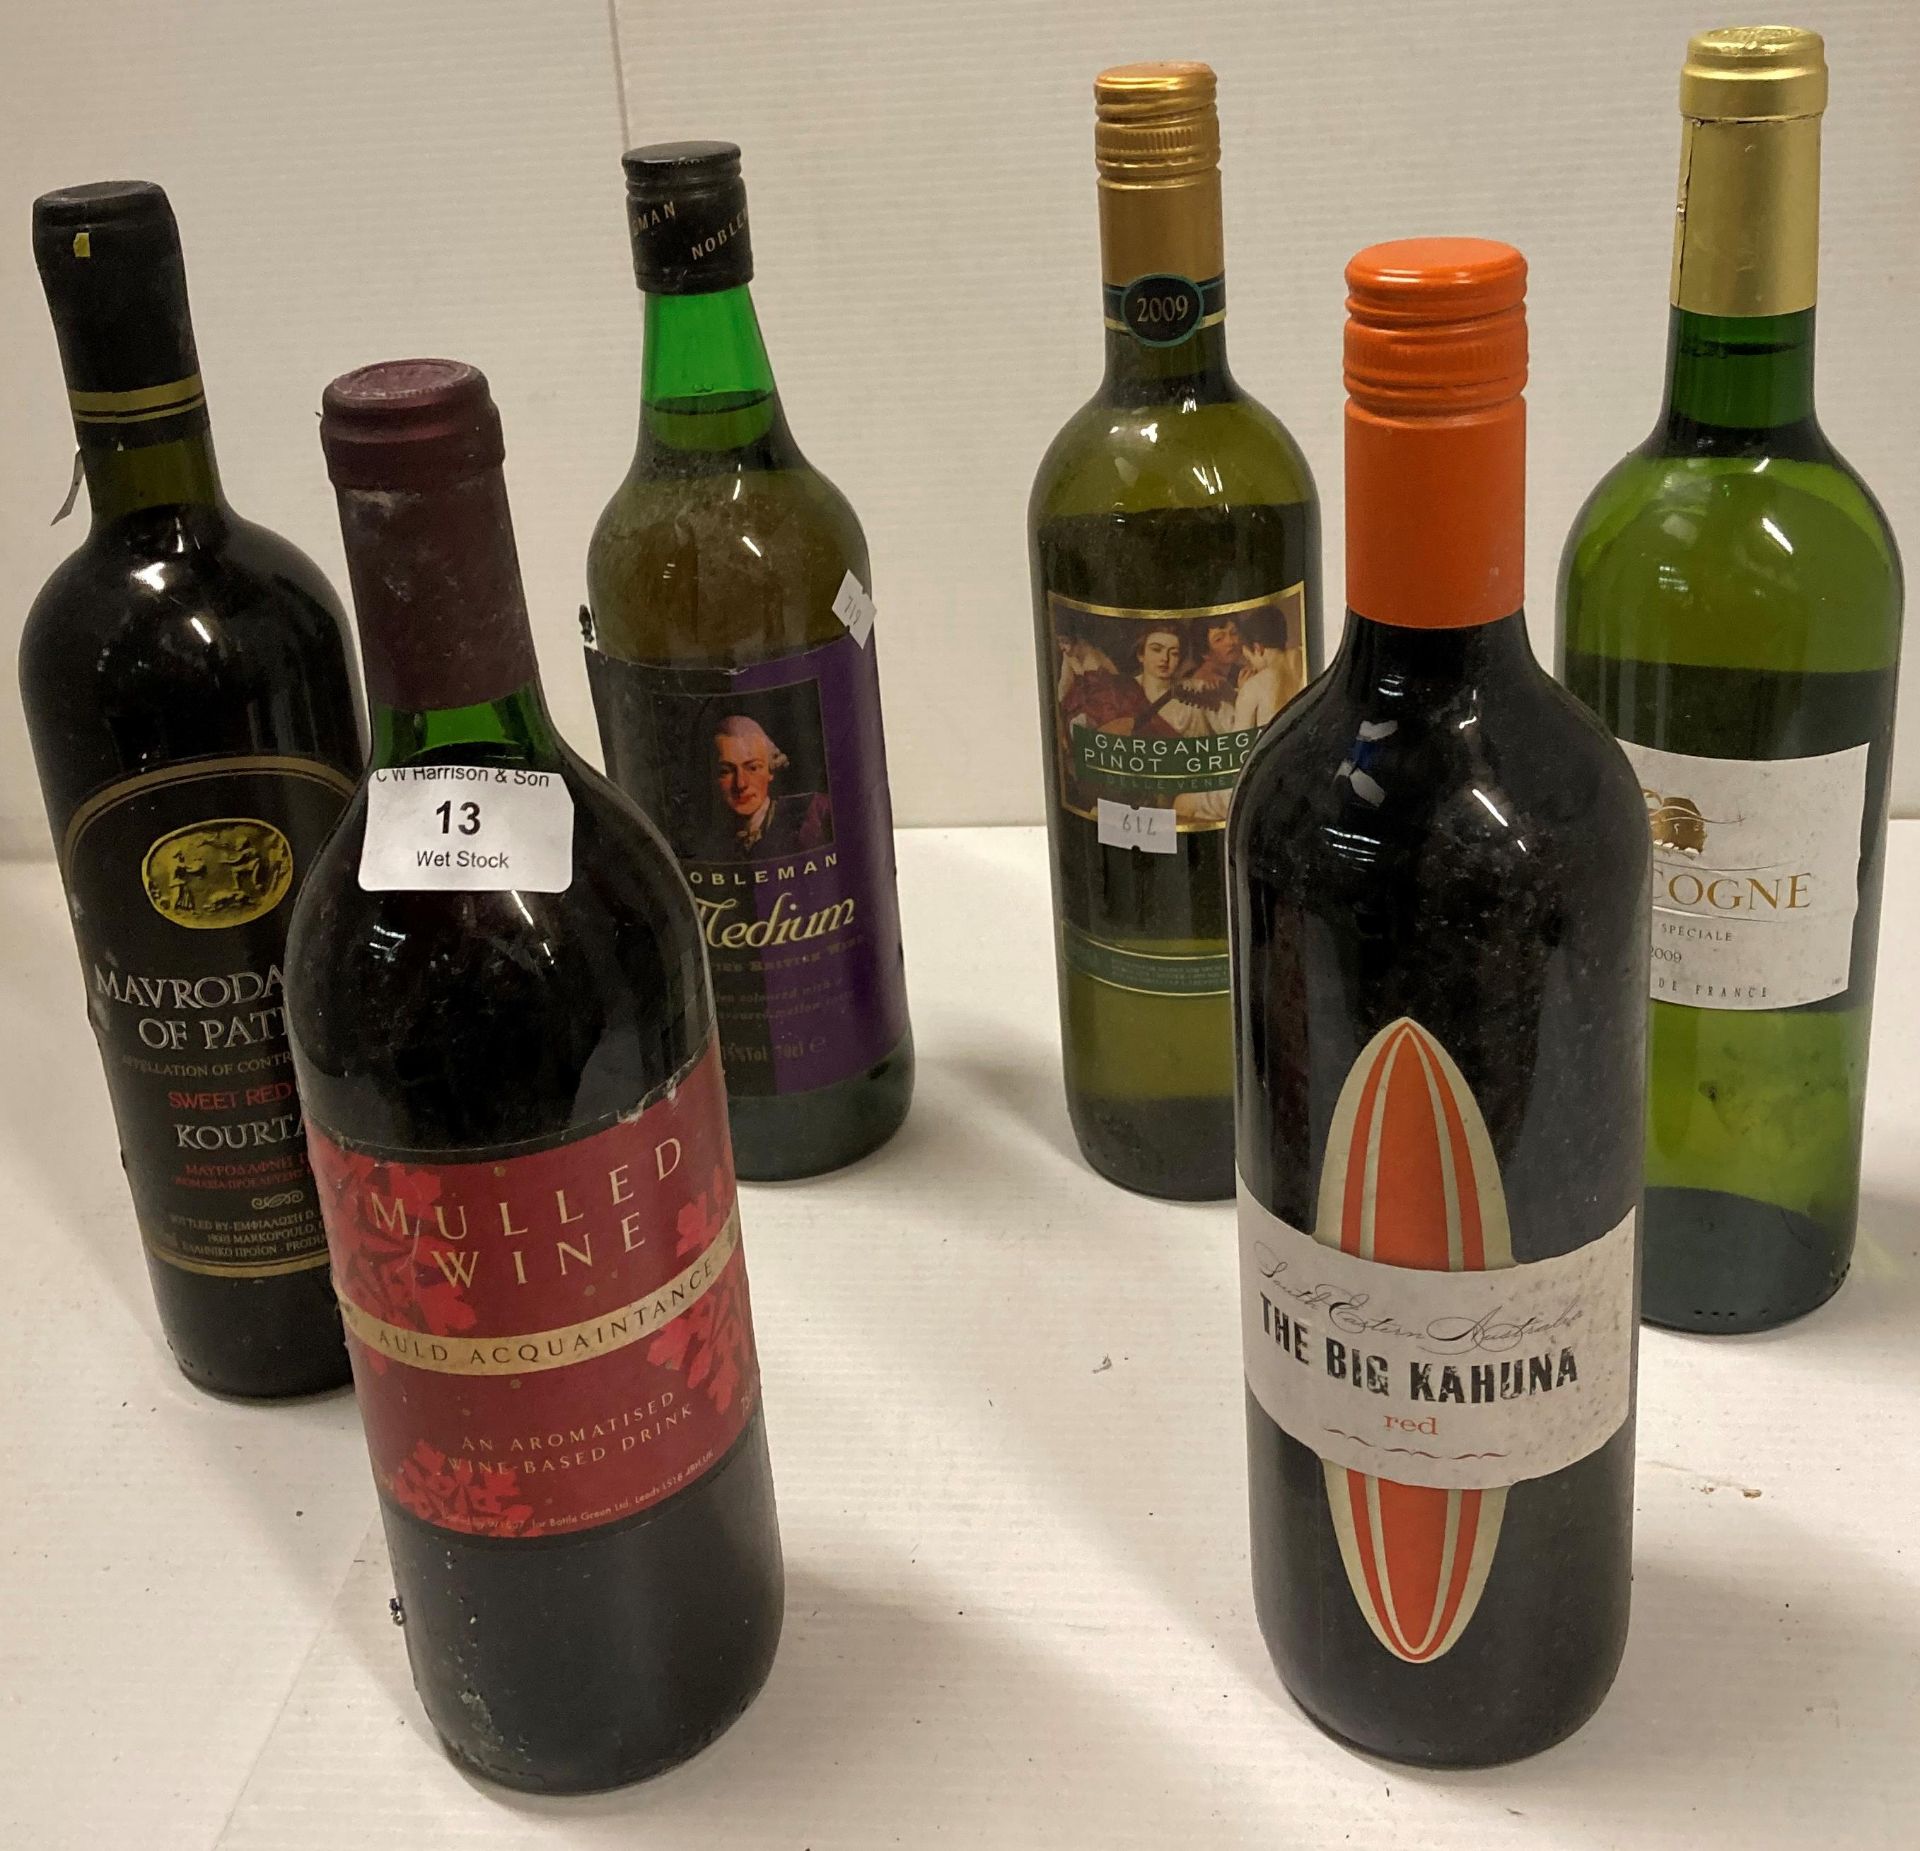 6 x assorted bottles of wine - Carganega Pinot Grigio, mulled wine, The Big Kahuna red,